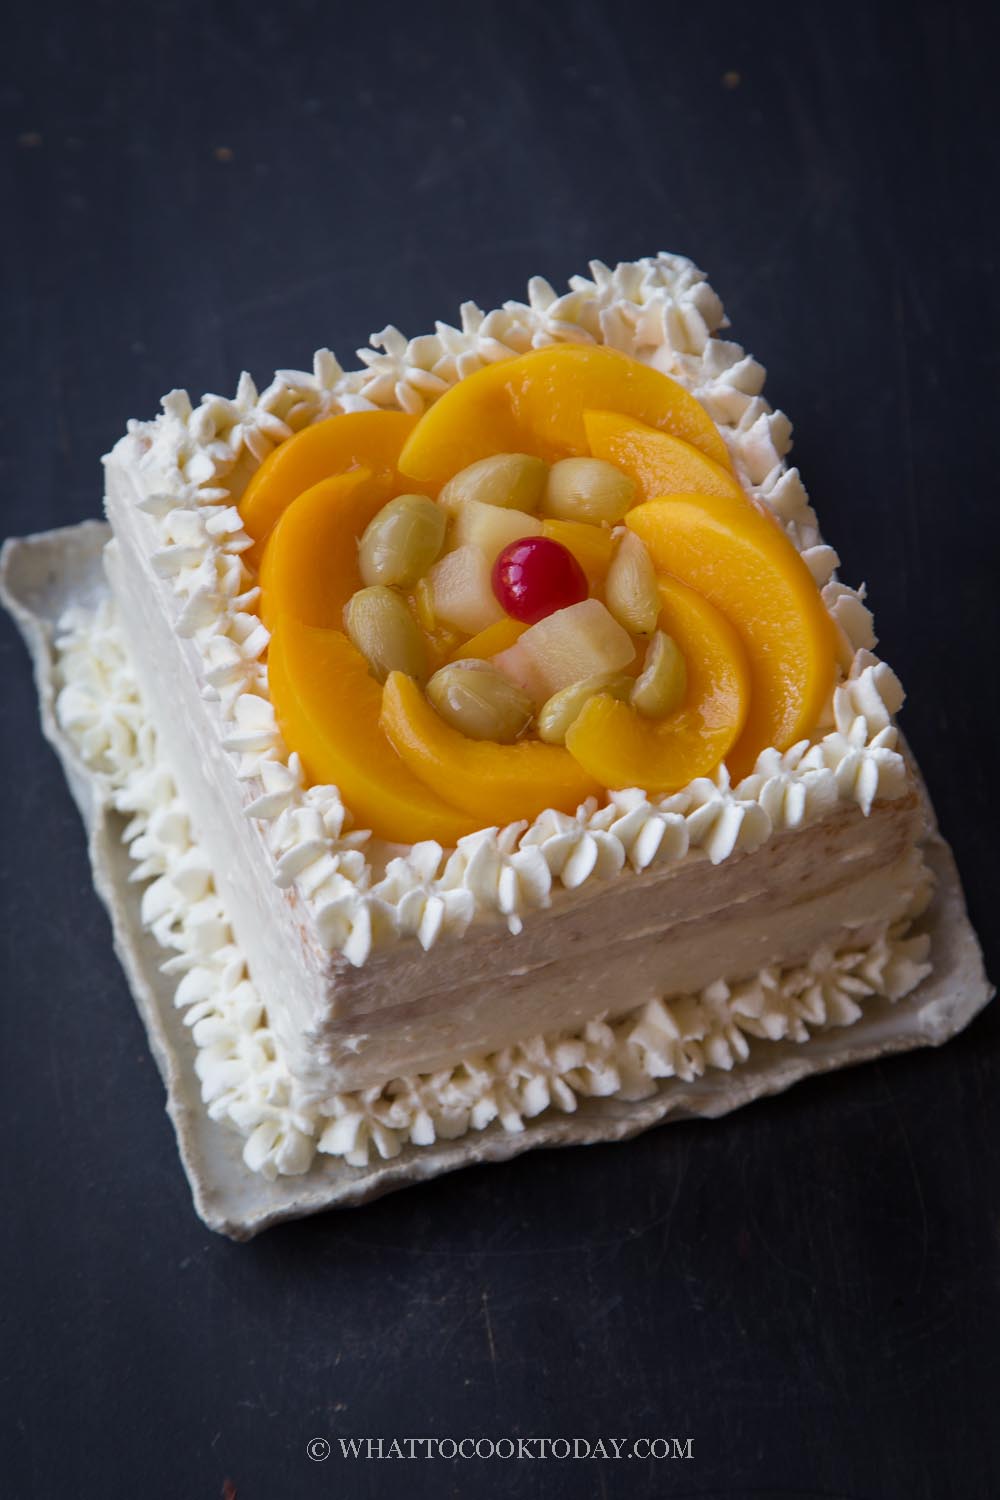 decorate cake with fruit